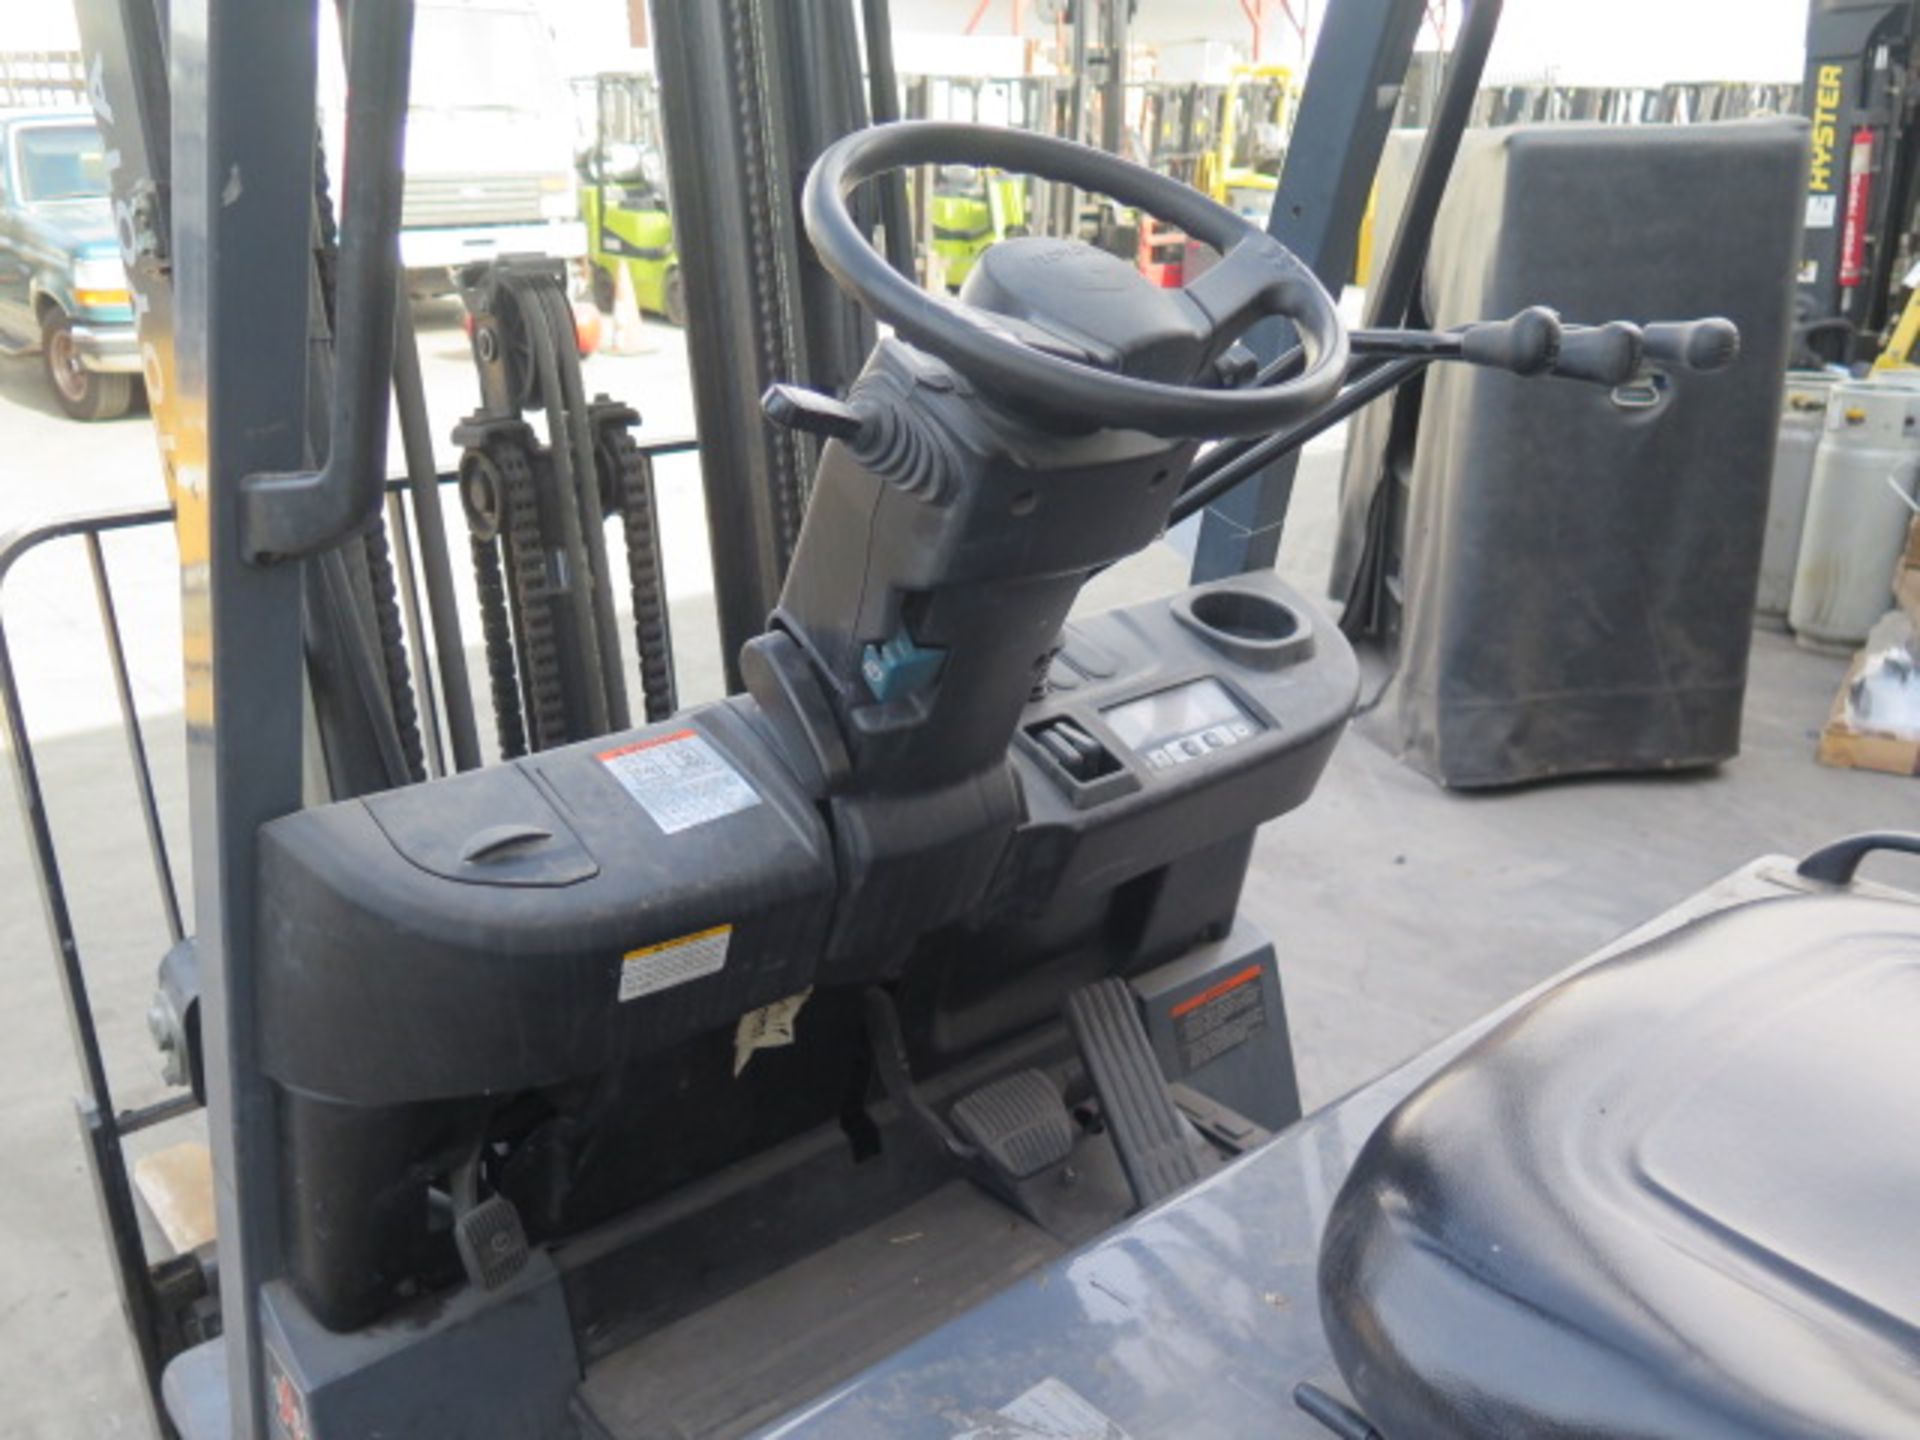 Toyota 8FBCU25 5000 Lb Cap Electric Forklift s/n 64087 w/ 3-Stage Mast, 198” Lift Height, Side - Image 8 of 12